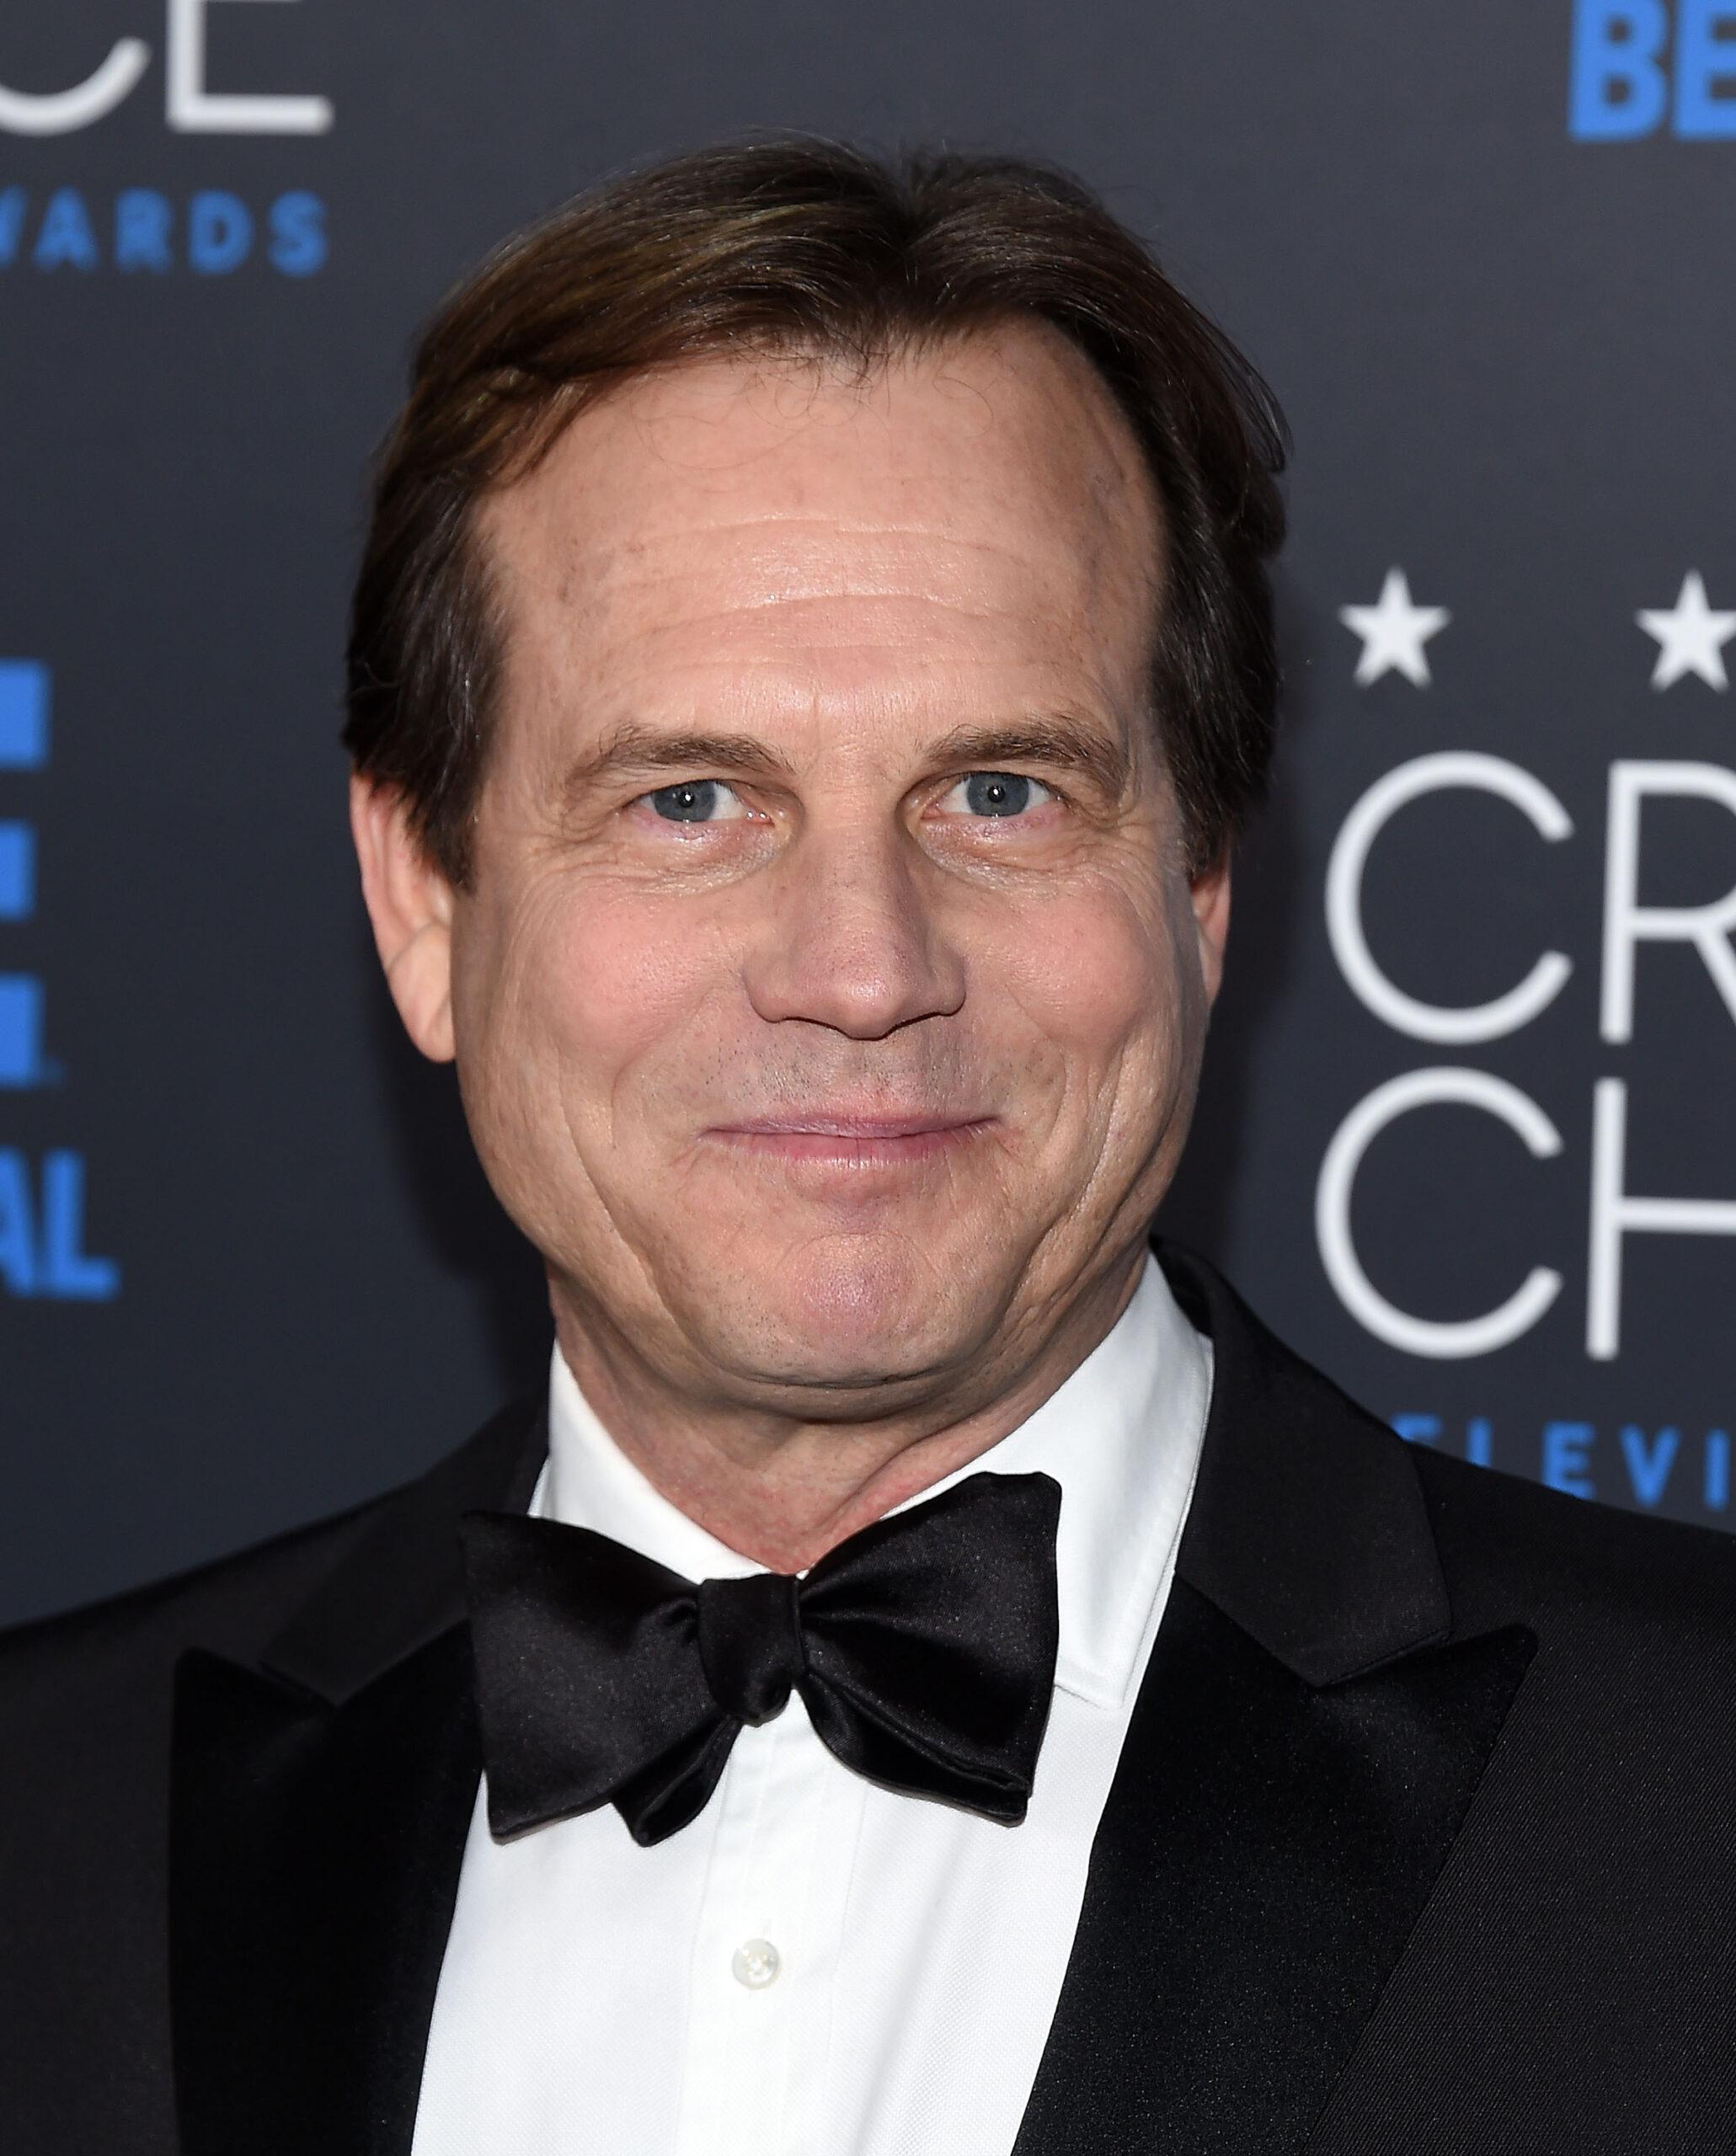 Actor Bill Paxton has died at the age of 61